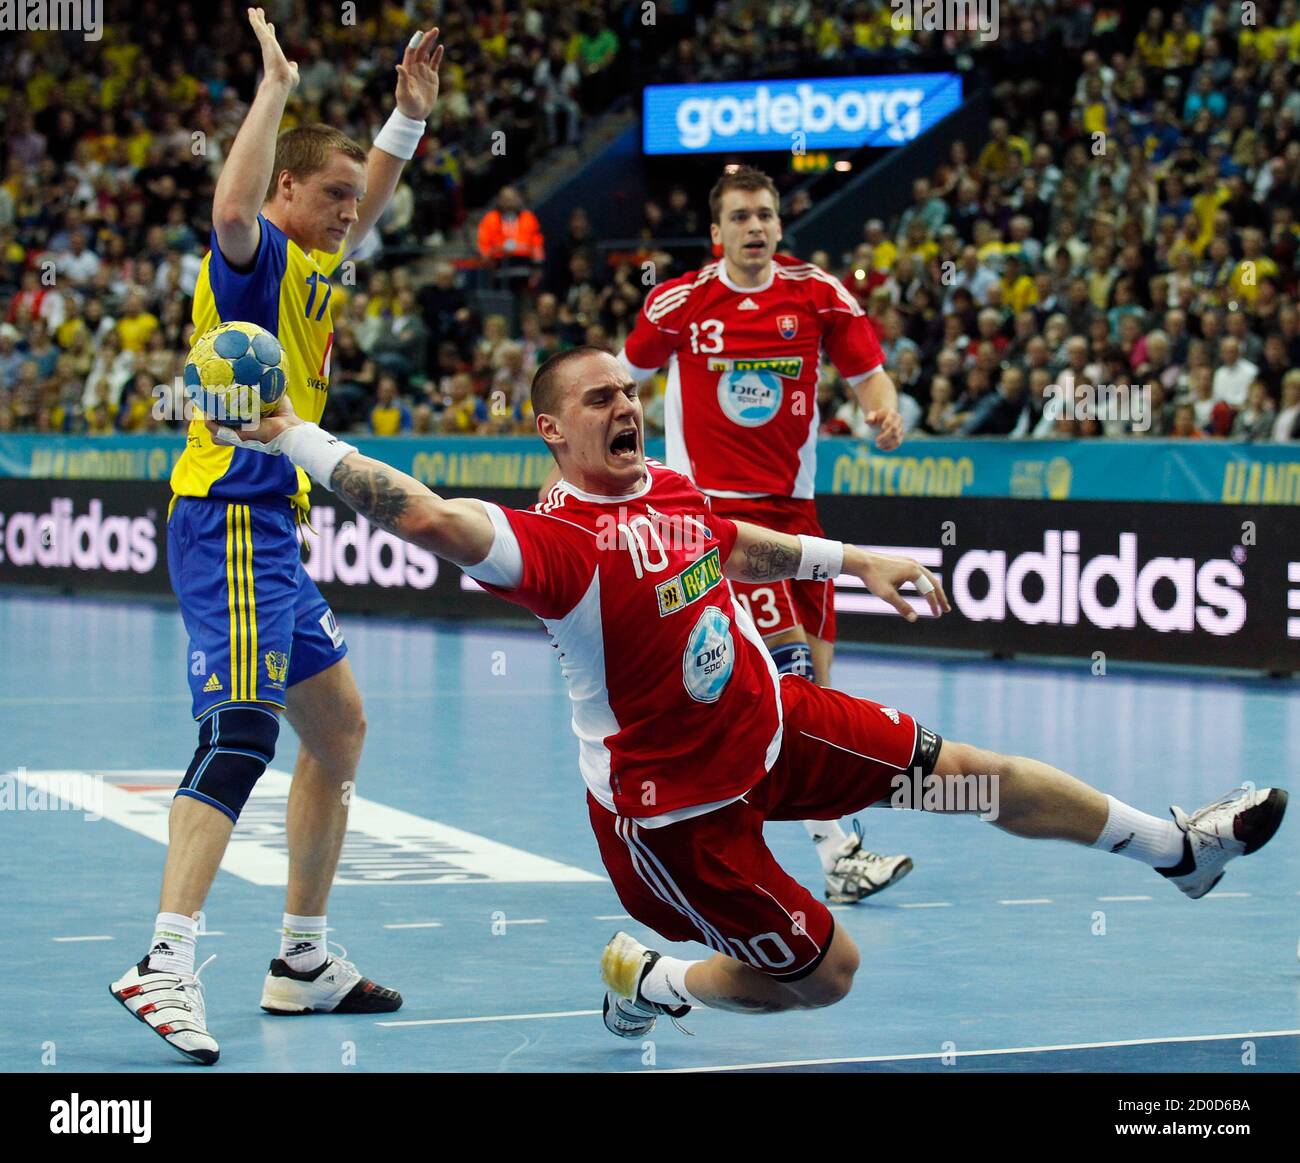 Slovakia's Michal Kopco (C) shoots on the goal next to Sweden's Oscar  Carlen (L) during their game at the Men's Handball World Championship in  Gothenburg January 15, 2011. REUTERS/Umit Bektas (SWEDEN -